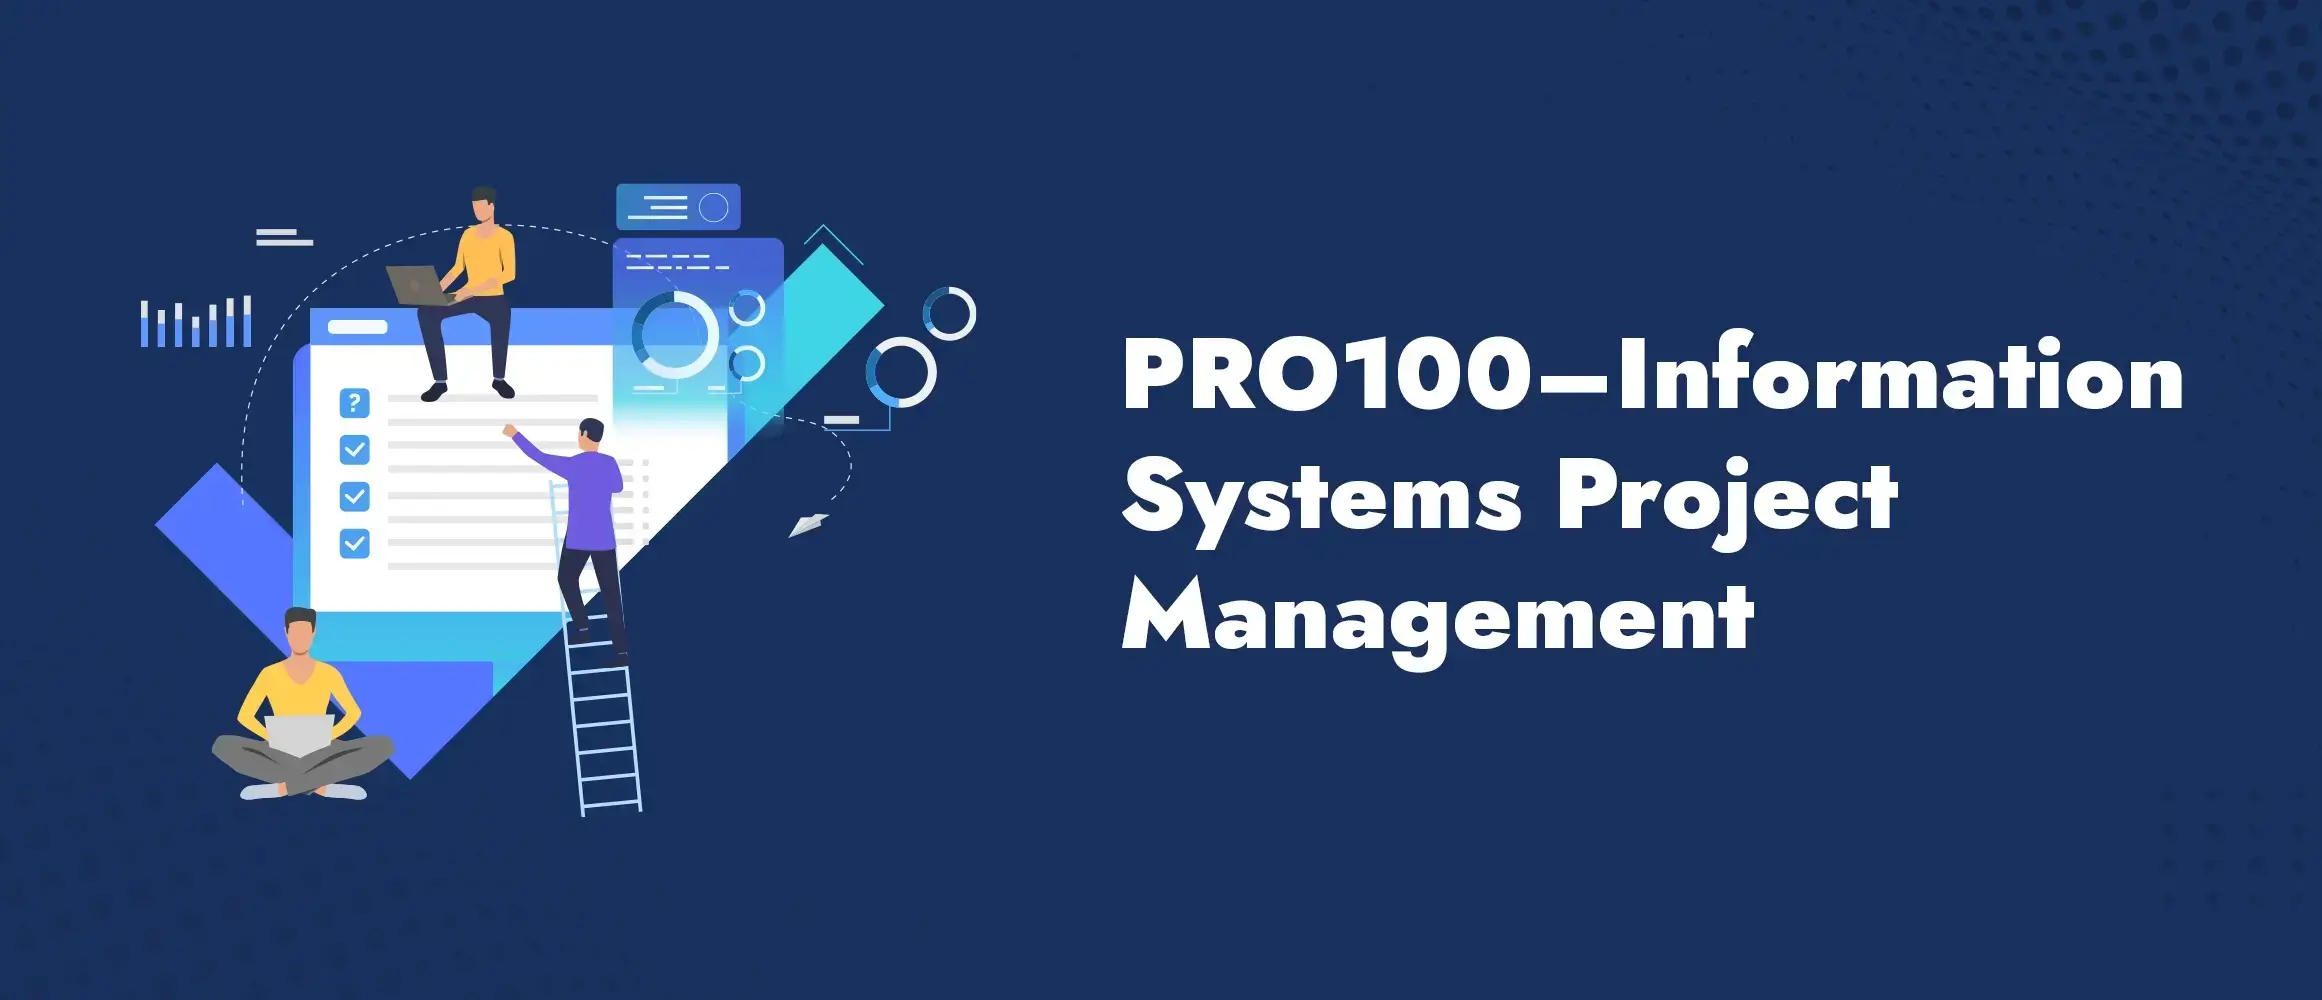 Pro100 Information Systems Project Management